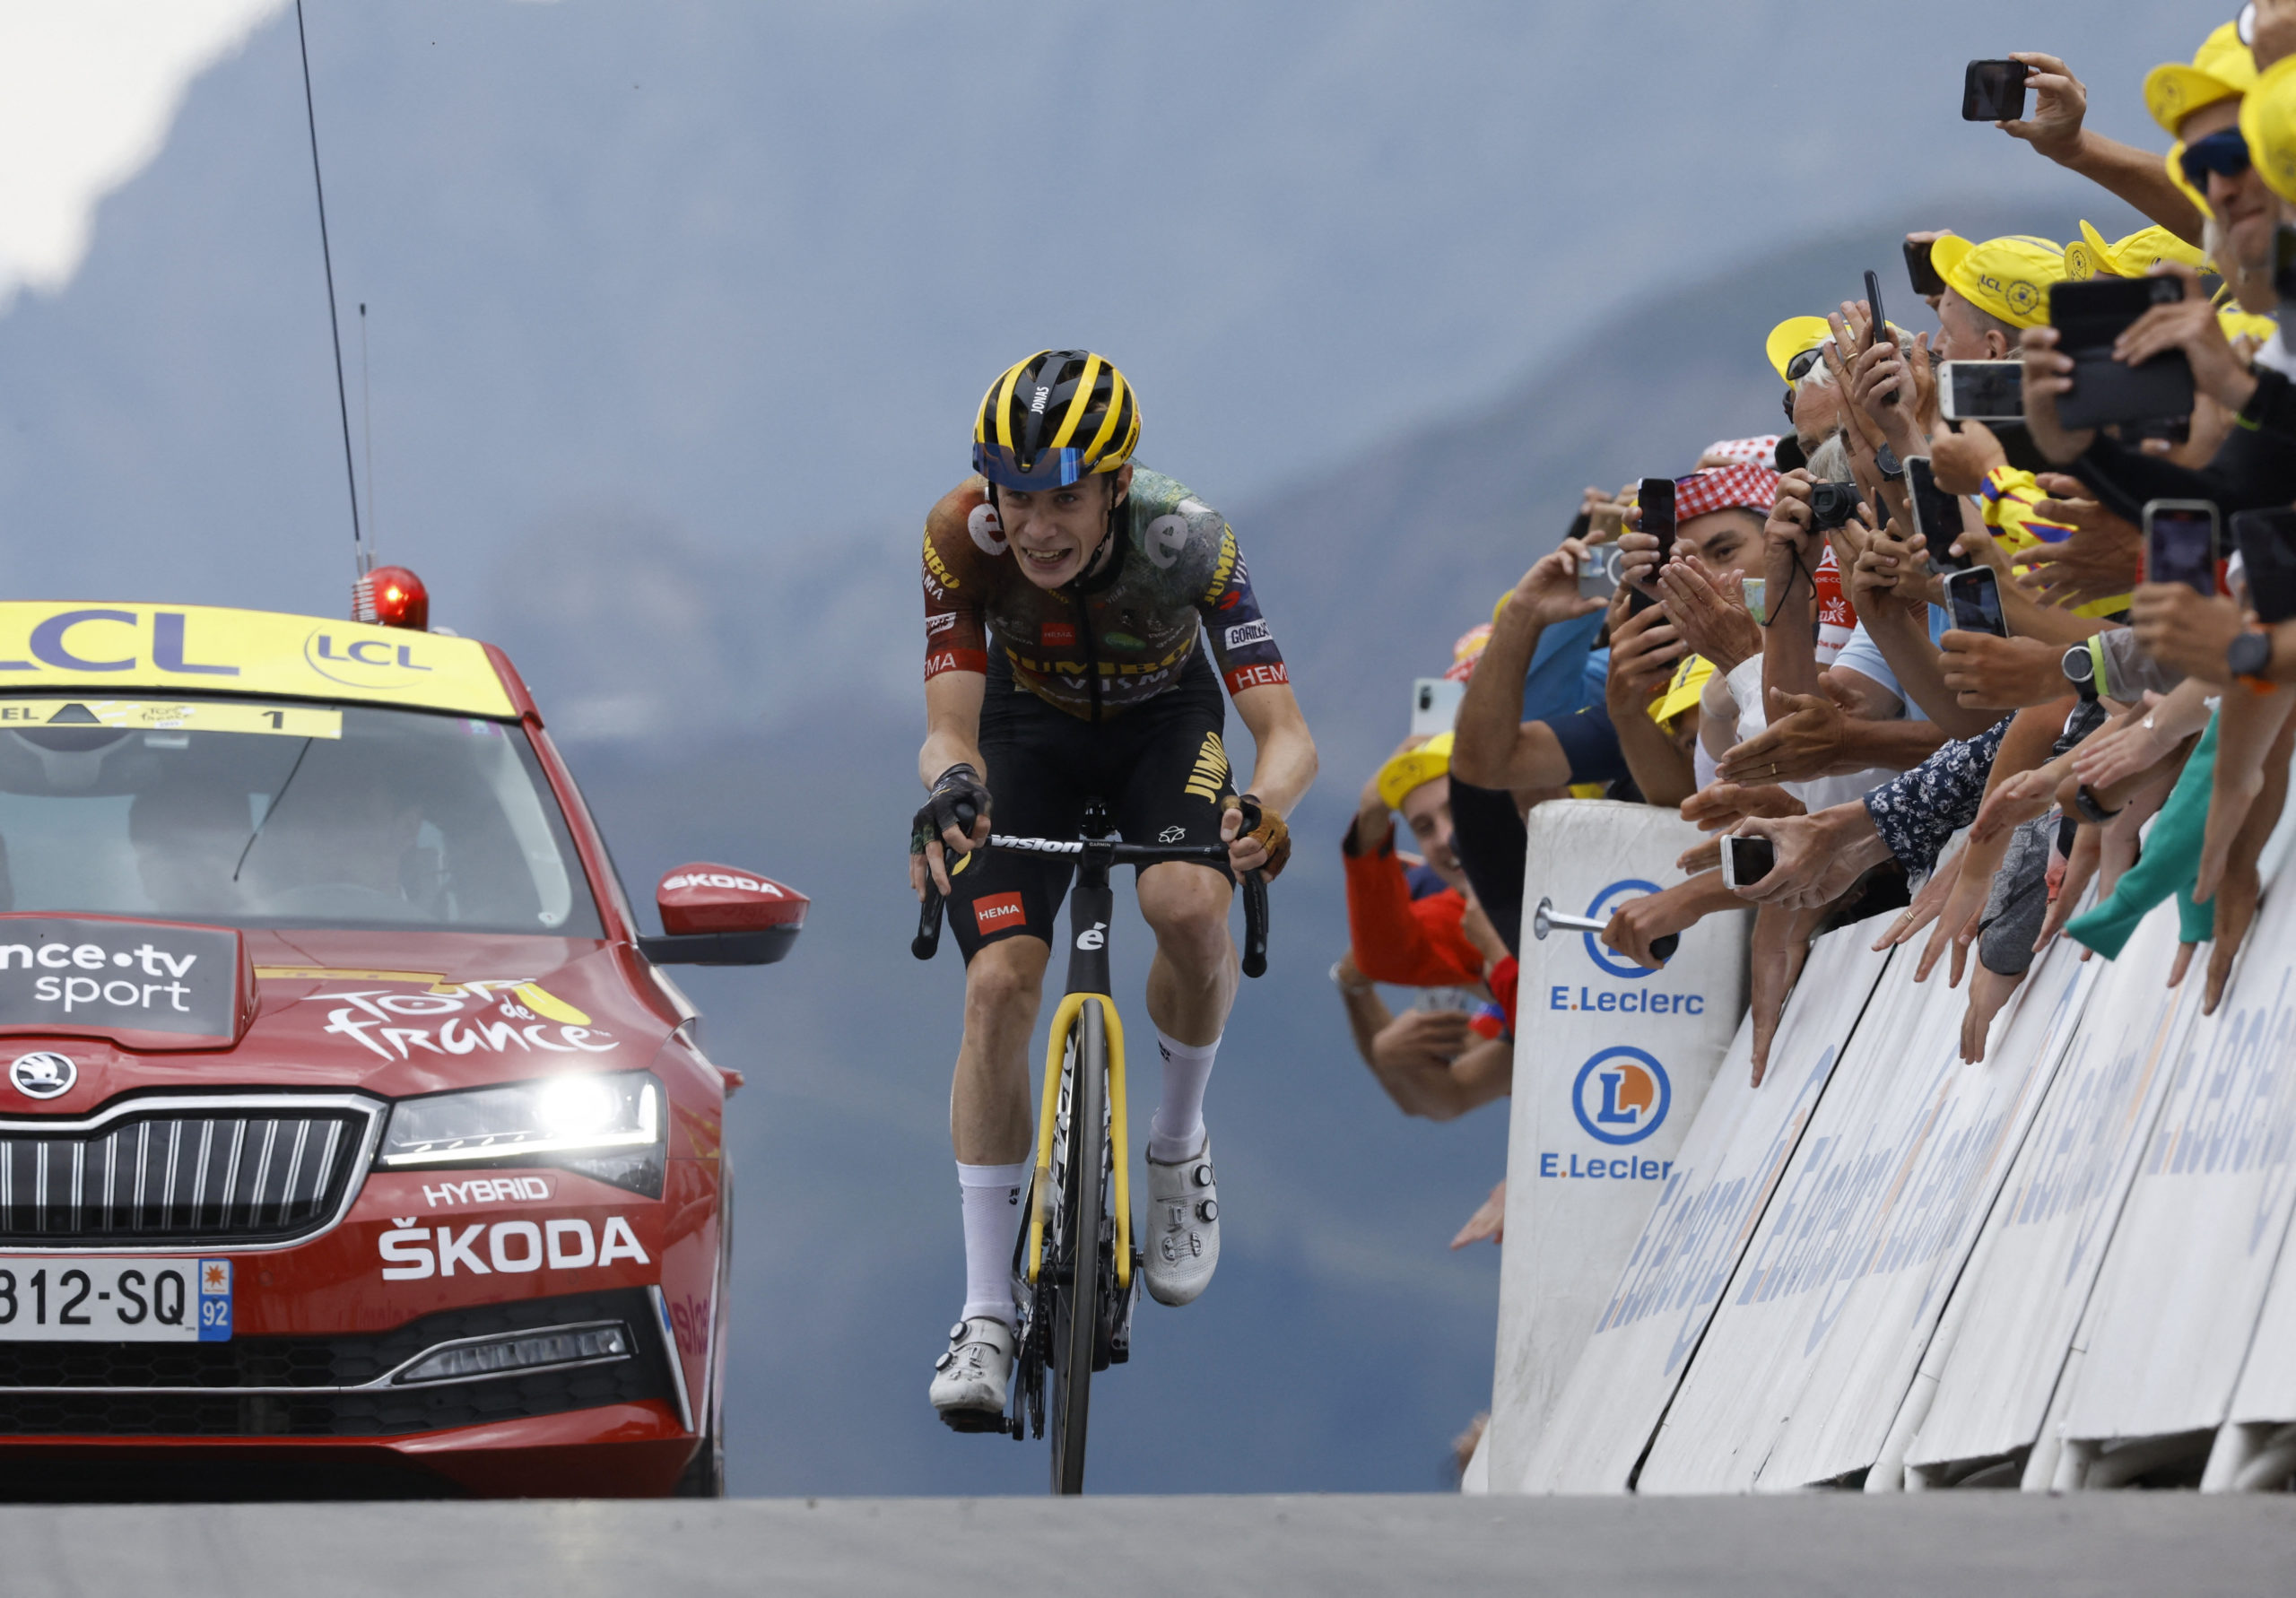 Jumbo - Visma's Jonas Vingegaard in action before he crosses the finish line to win stage 11 tour de france